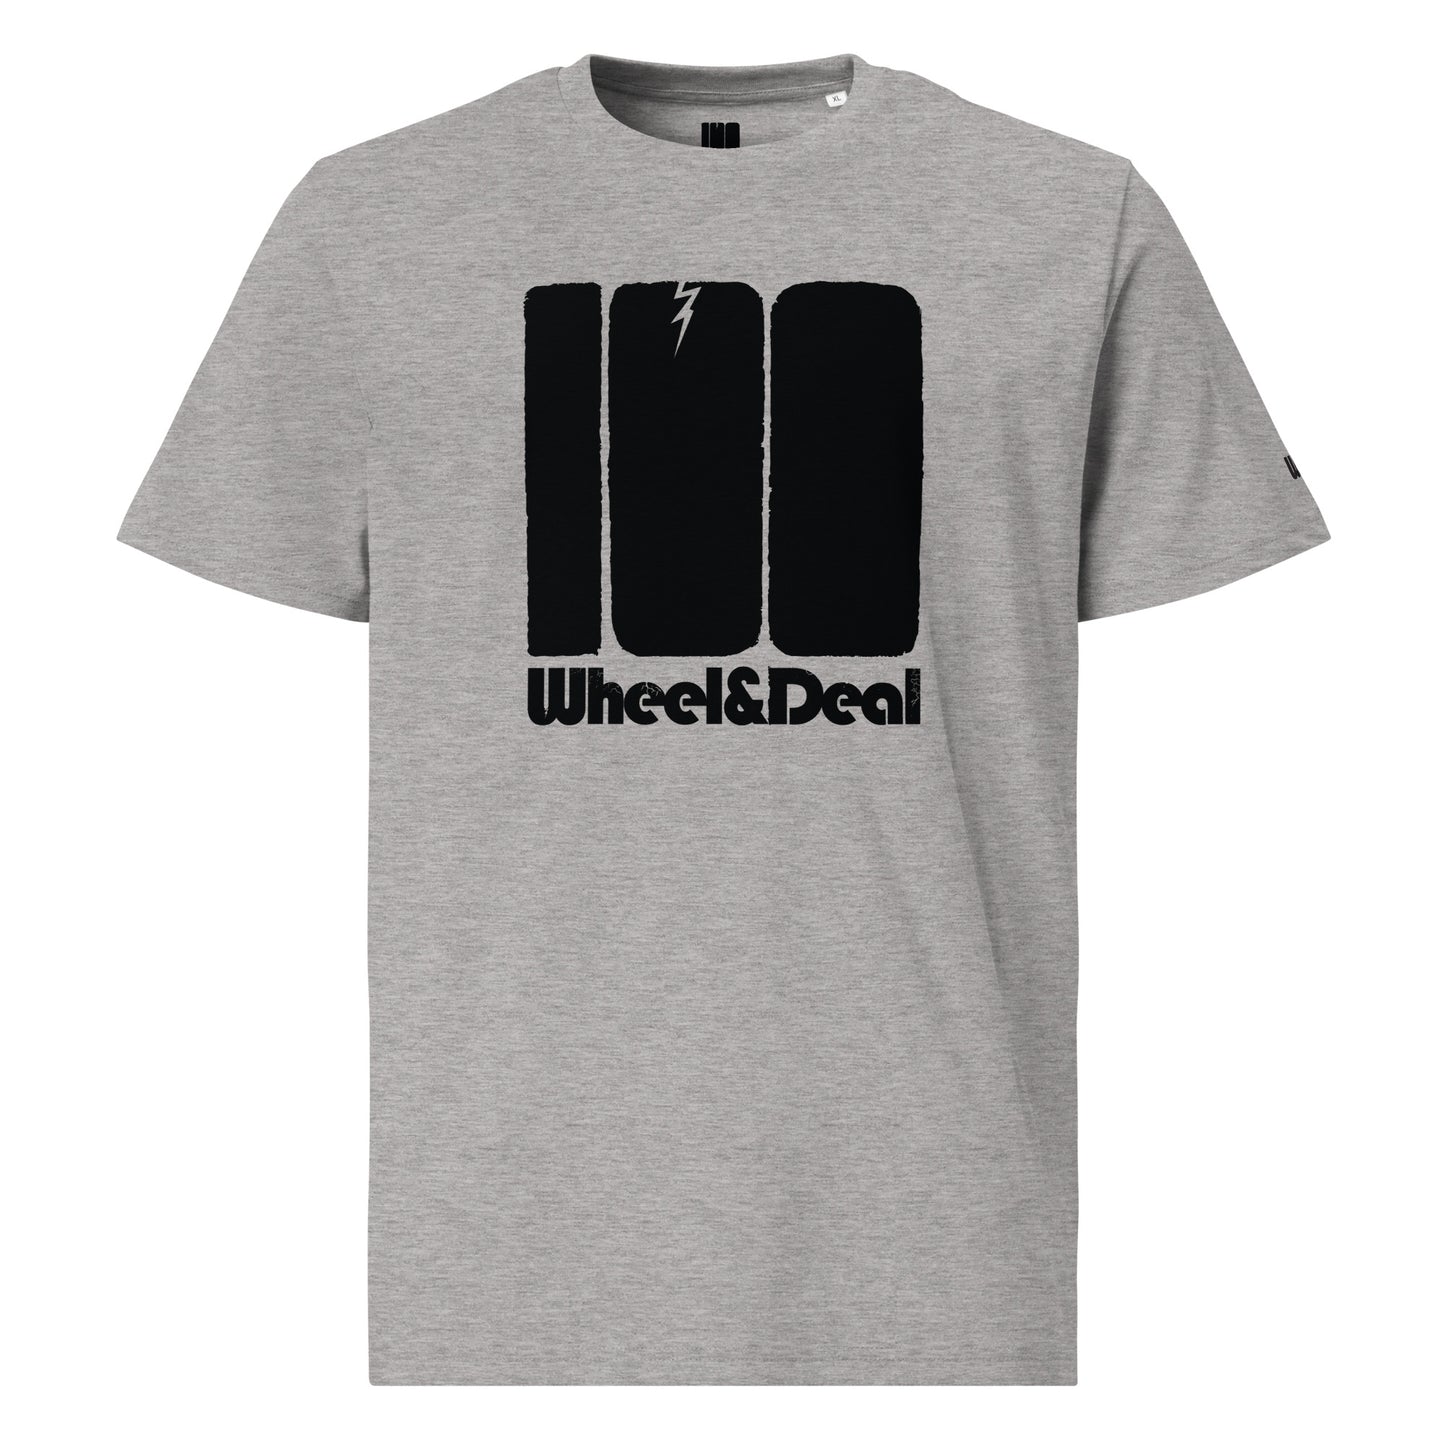 W&D100 - Celebrating our 100th Release on W&D T Shirt